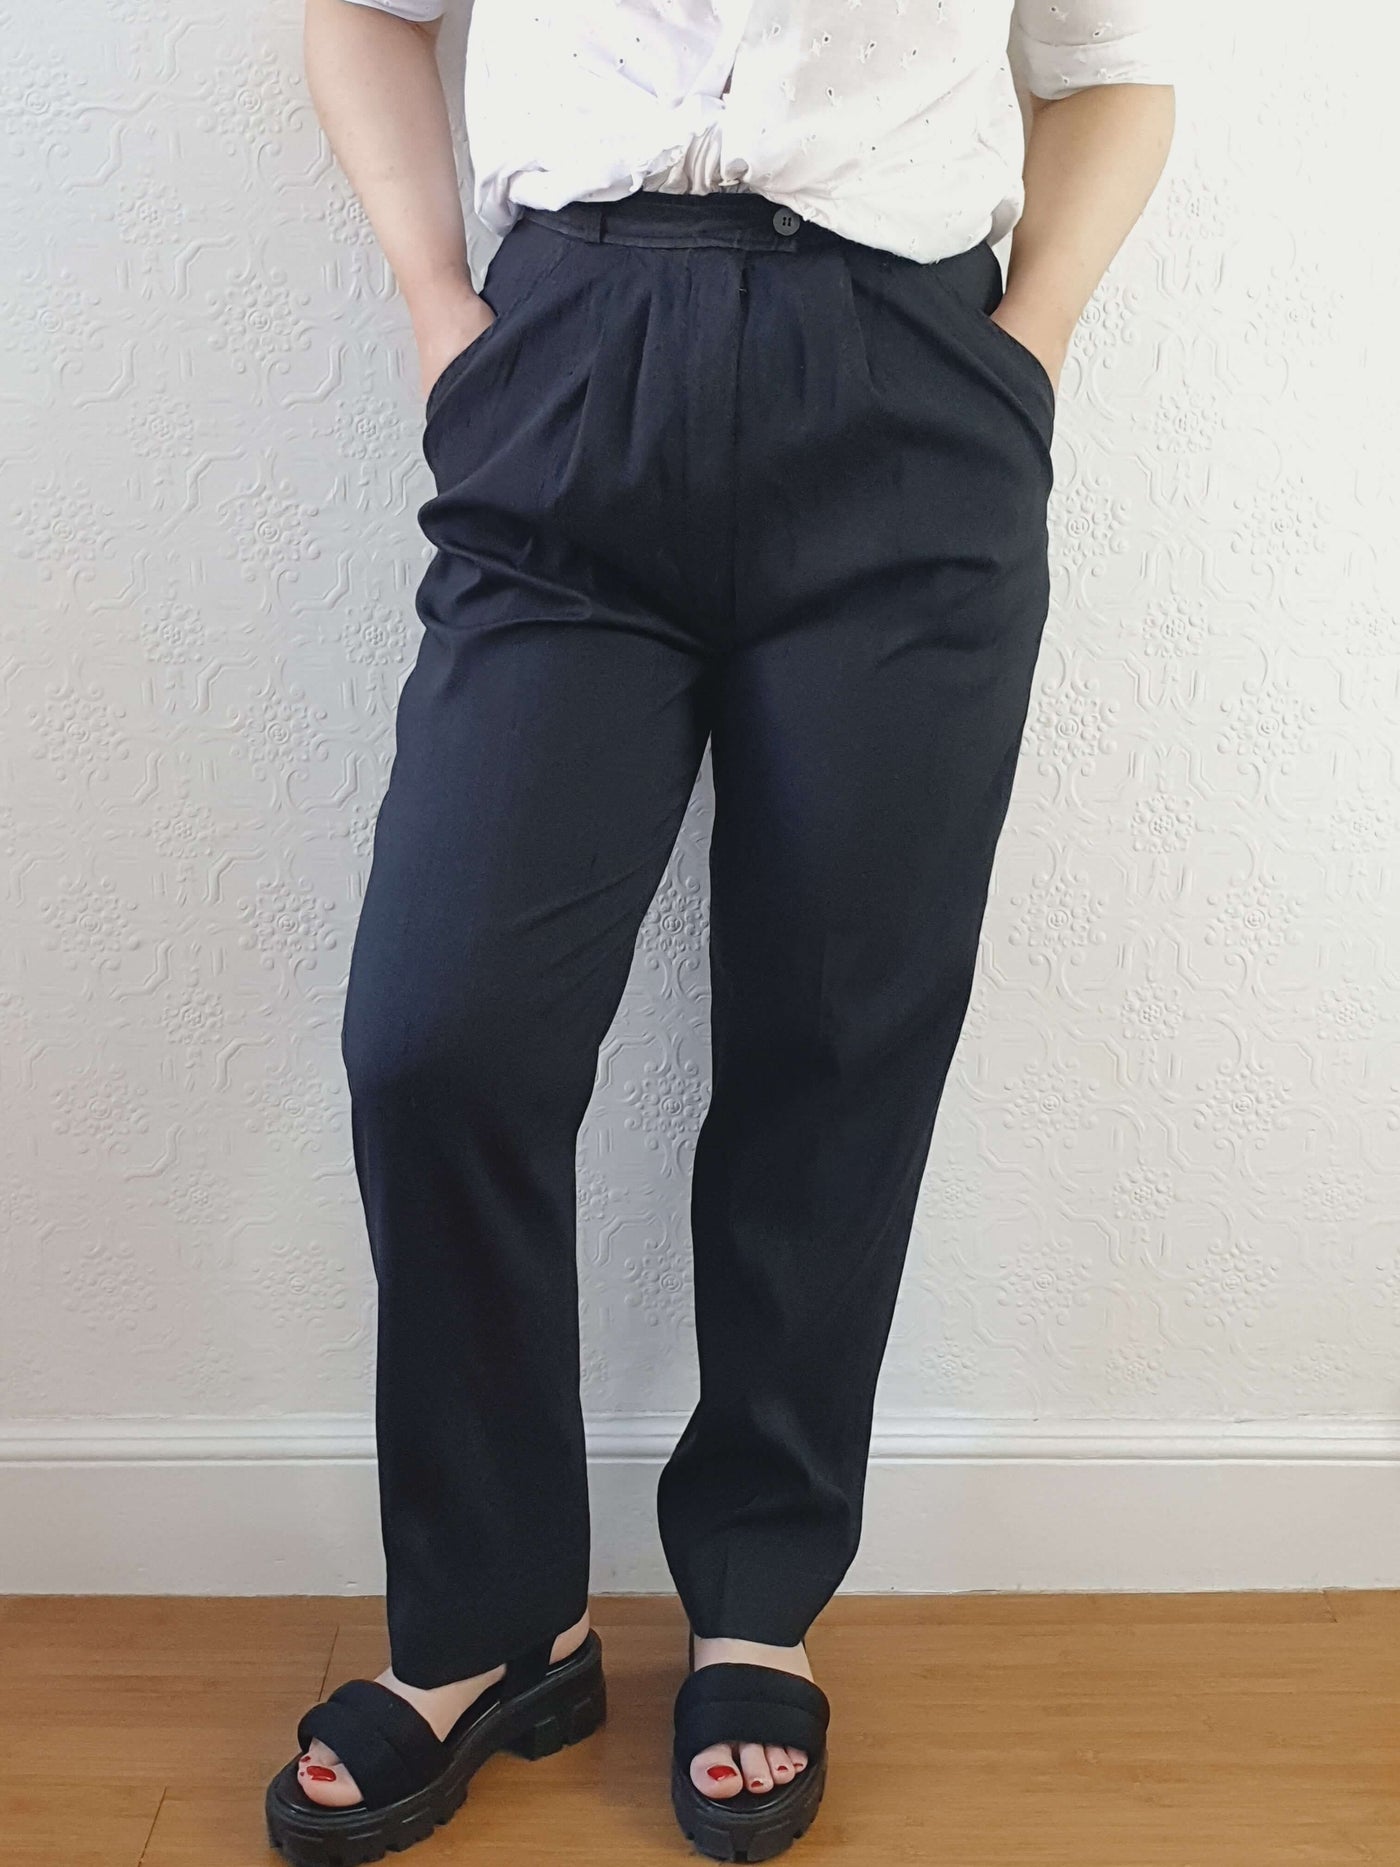 Vintage 100% Silk High Waisted Black Summer Trousers - S